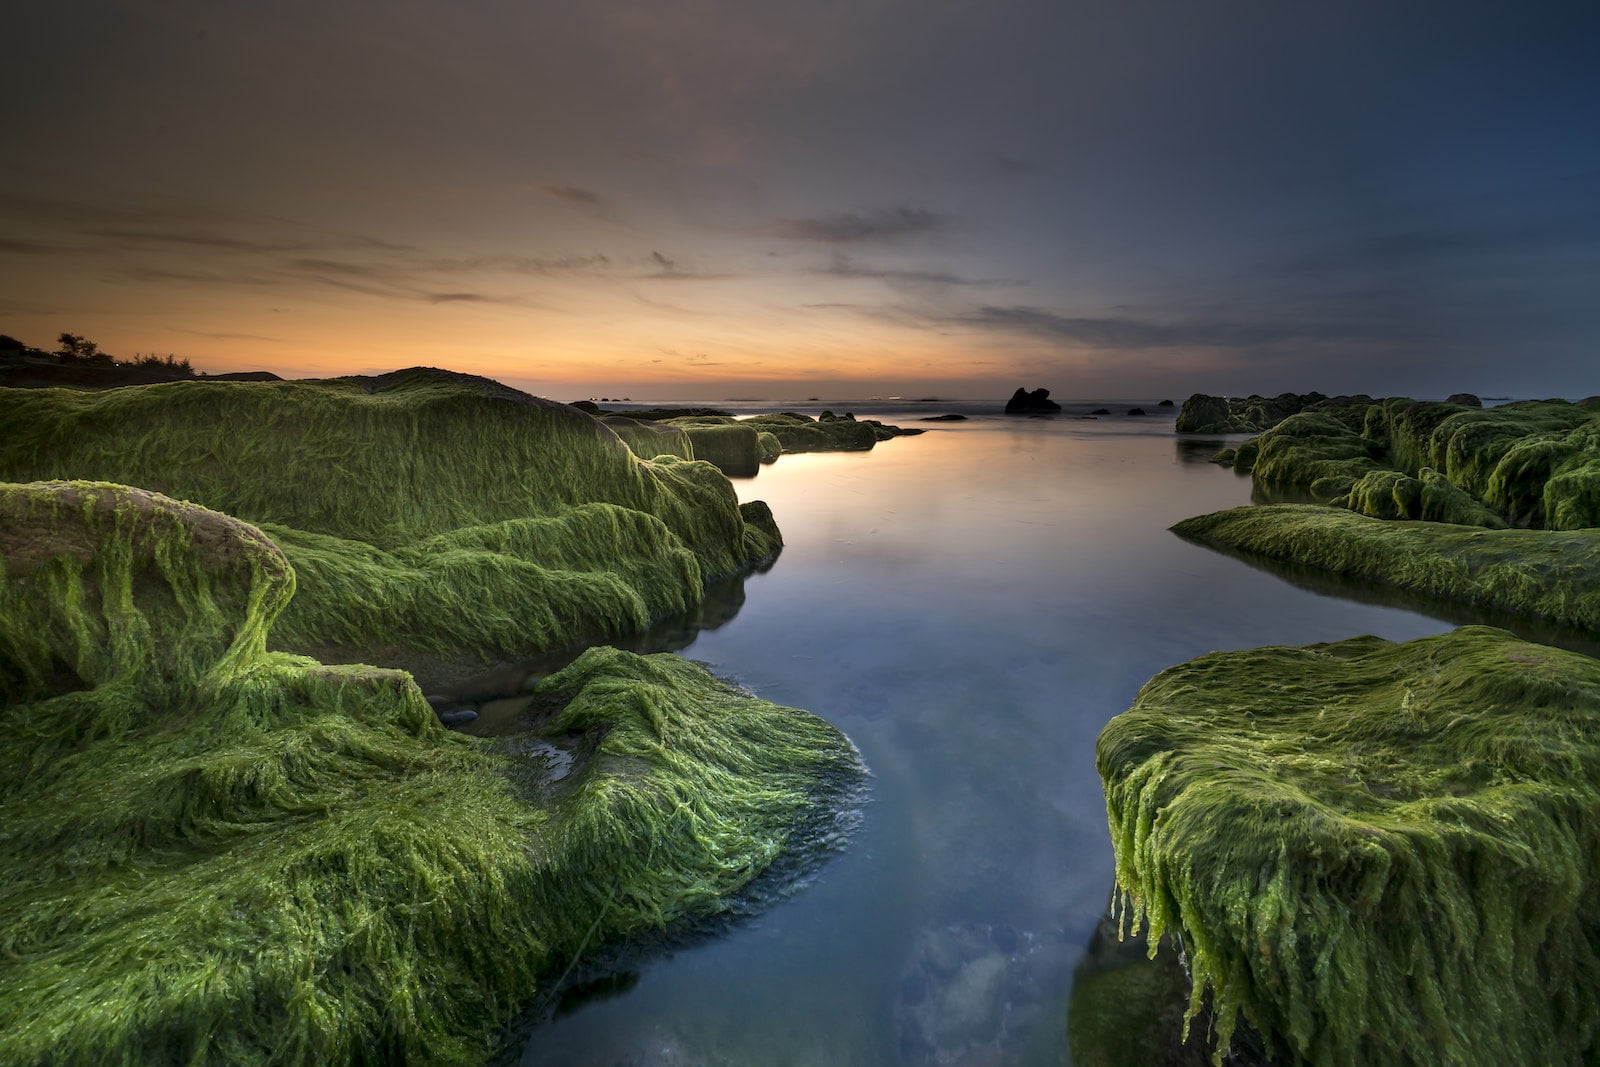 Mossy rocks in the water at sunset, reminiscent of serenity and tranquility.